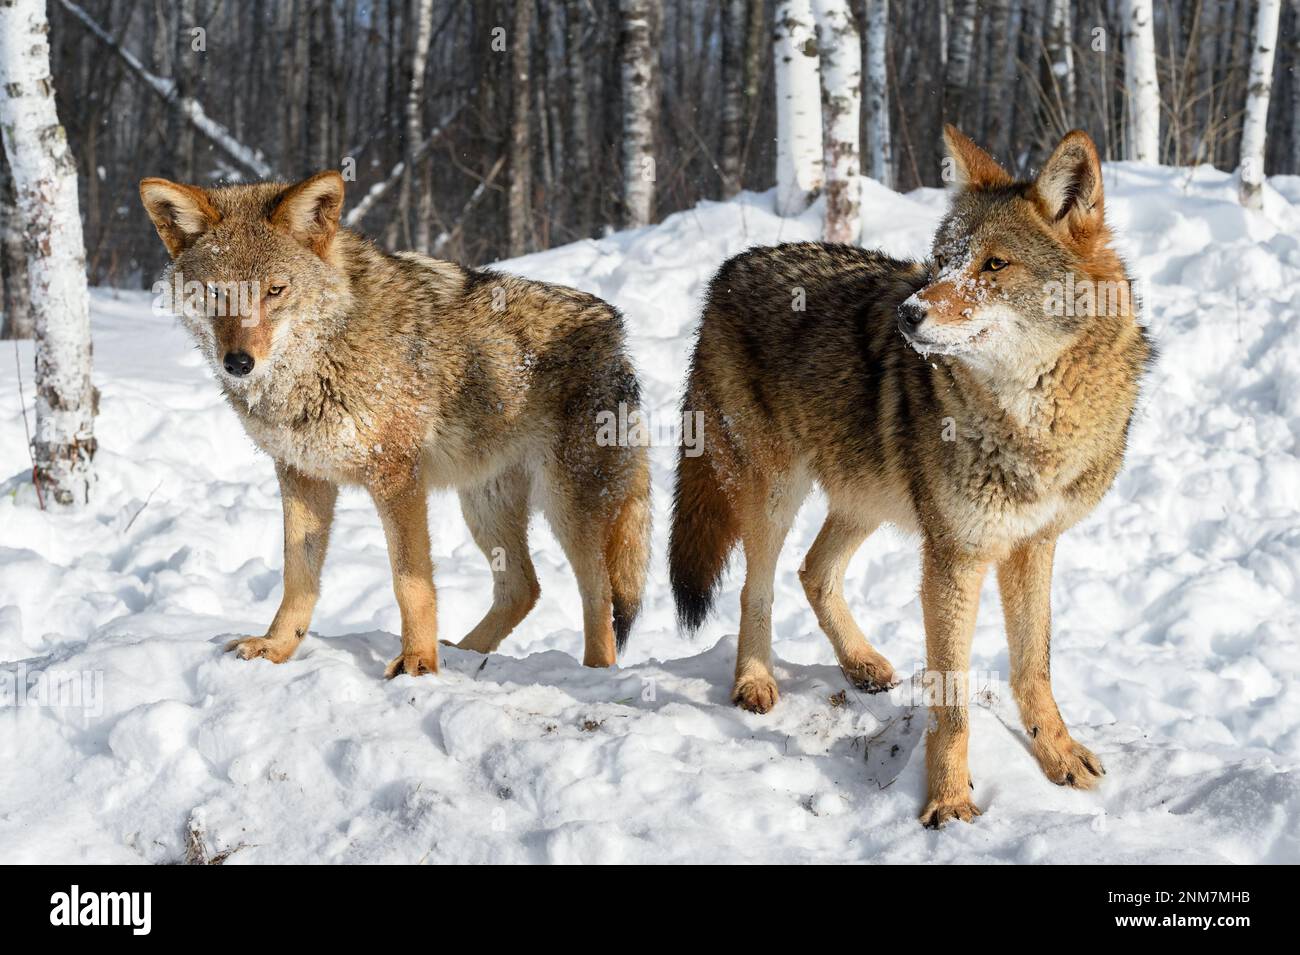 Two Coyotes (Canis latrans) Stand Side by Side Near Woods Winter - captive animals Stock Photo